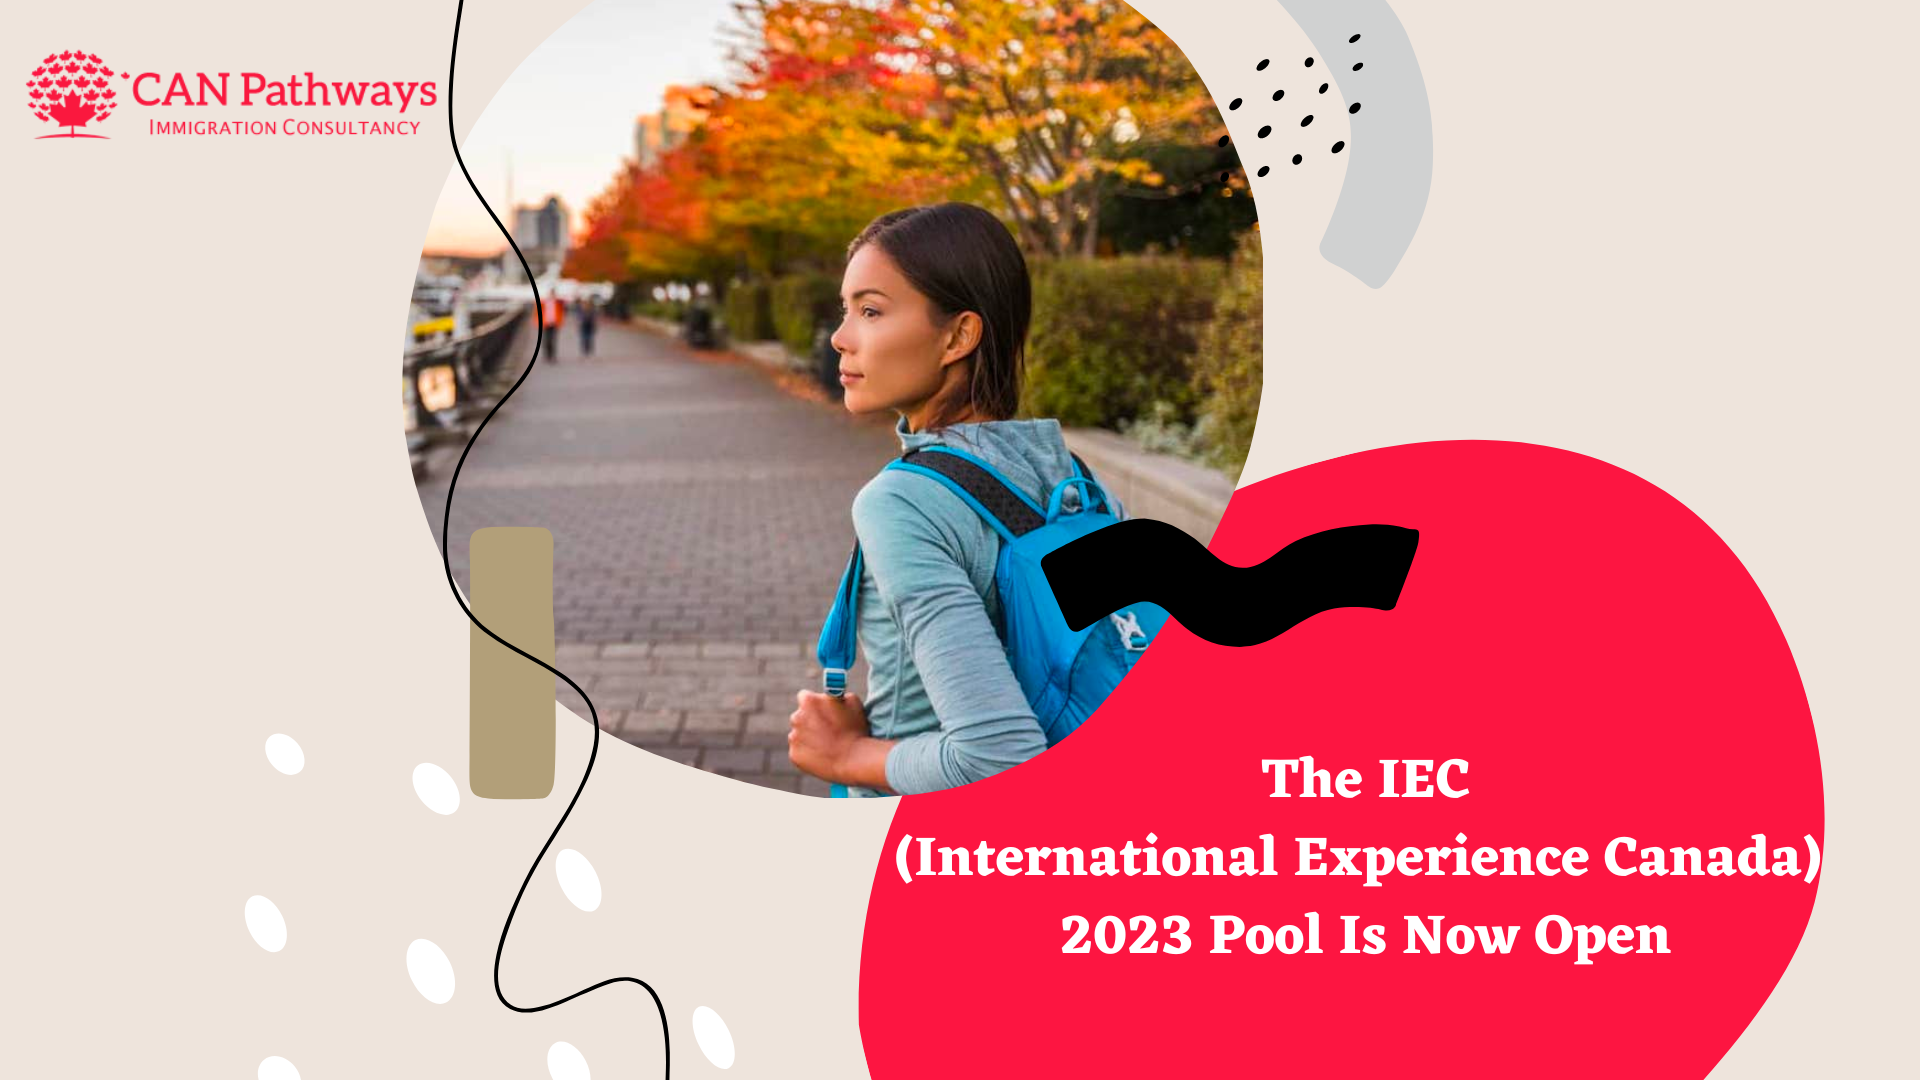 The IEC 2023 Pool Is Now Open